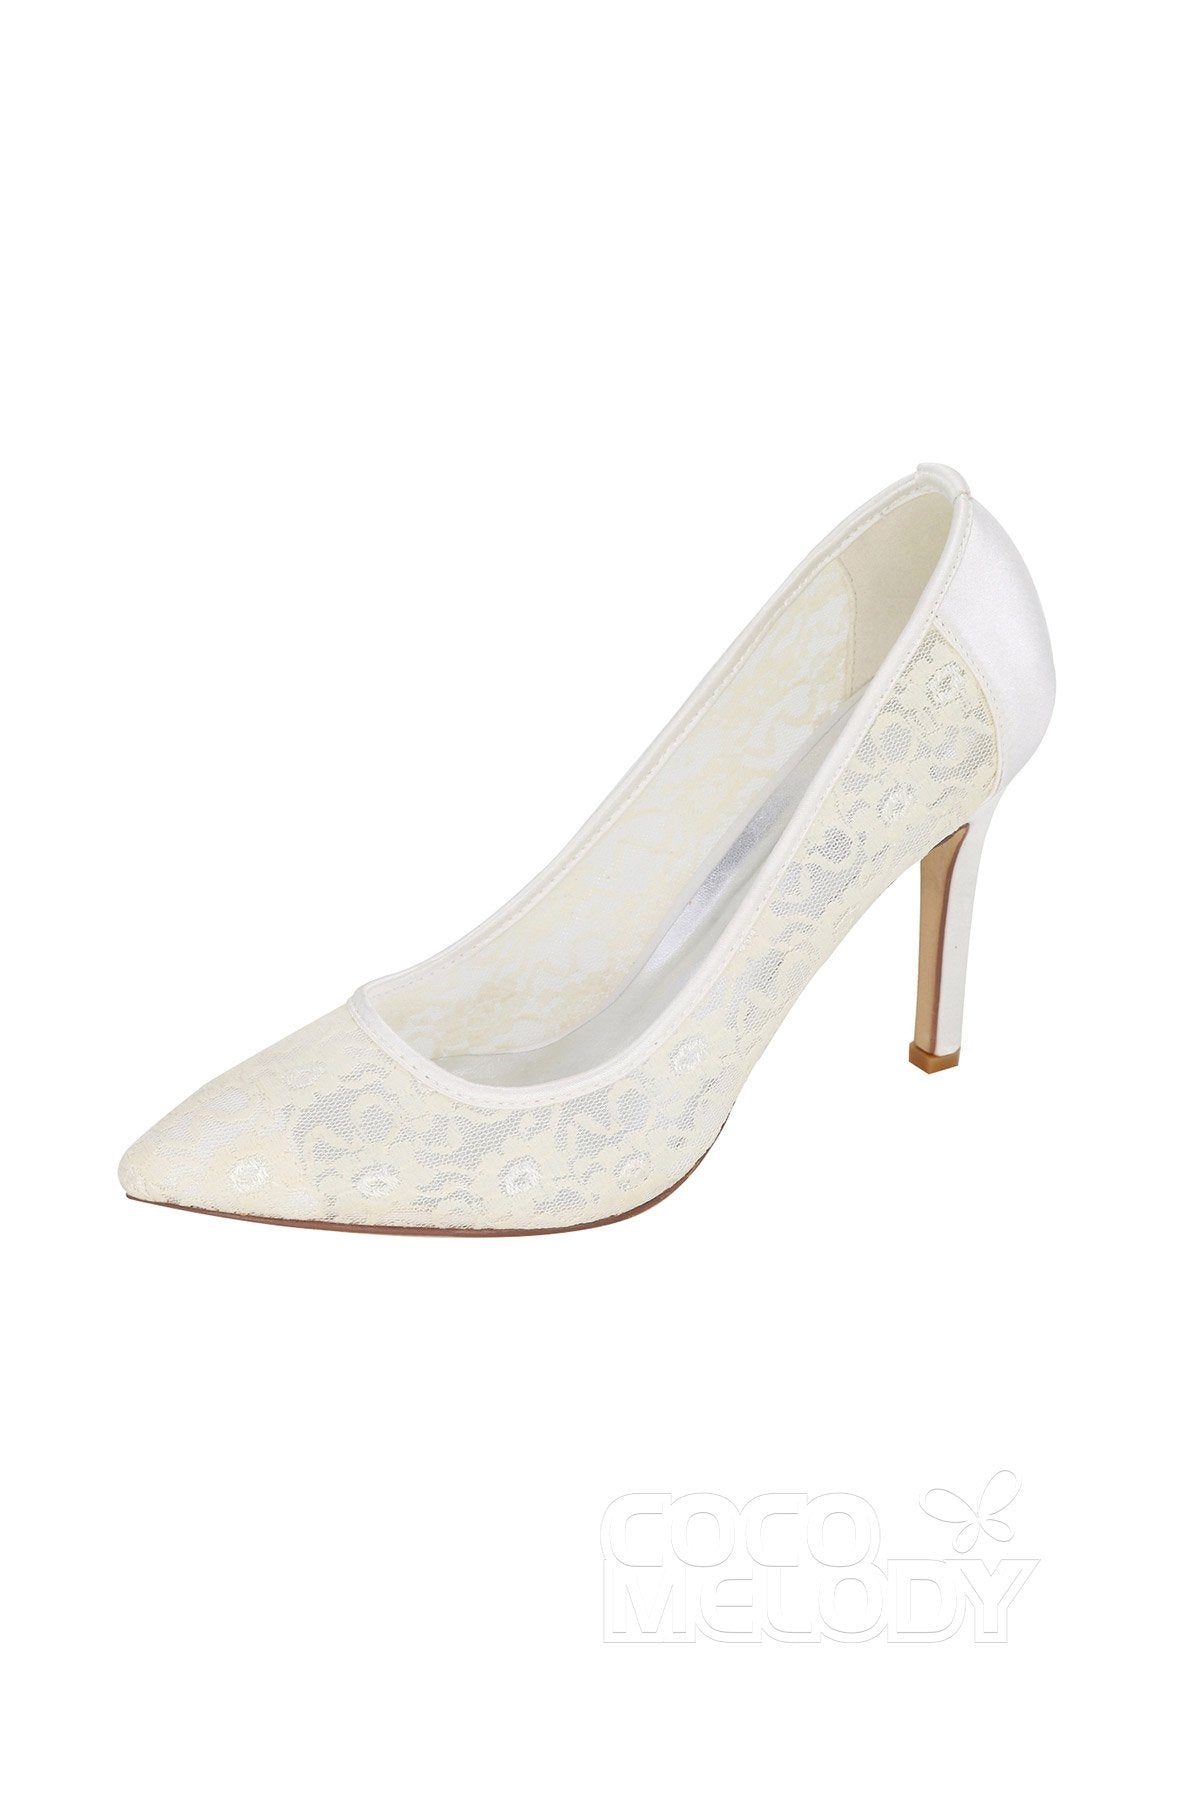 Stiletto Heel Lace Pointed Toe Bridal Shoes SWS16035